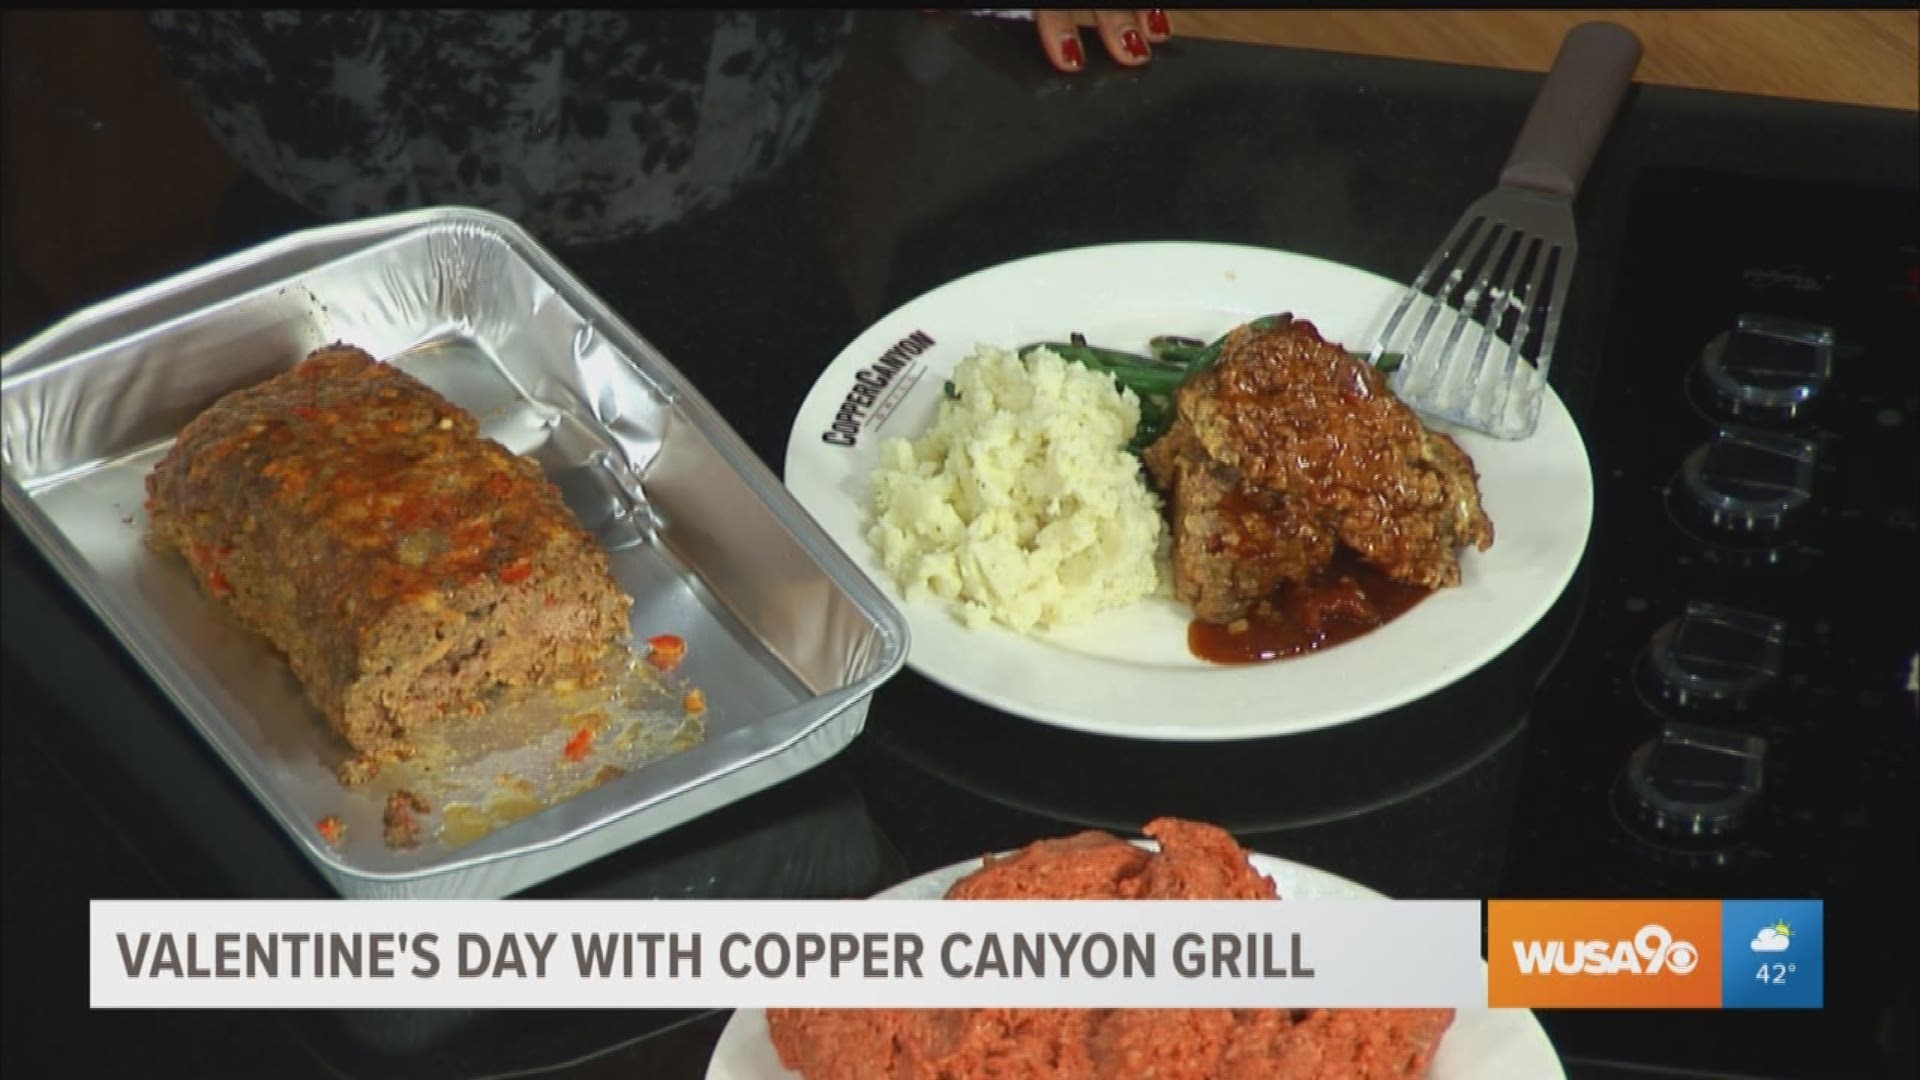 Chef Anthony Peake of Copper Canyon Grill has a meatloaf recipe that will make your taste buds fall in love.